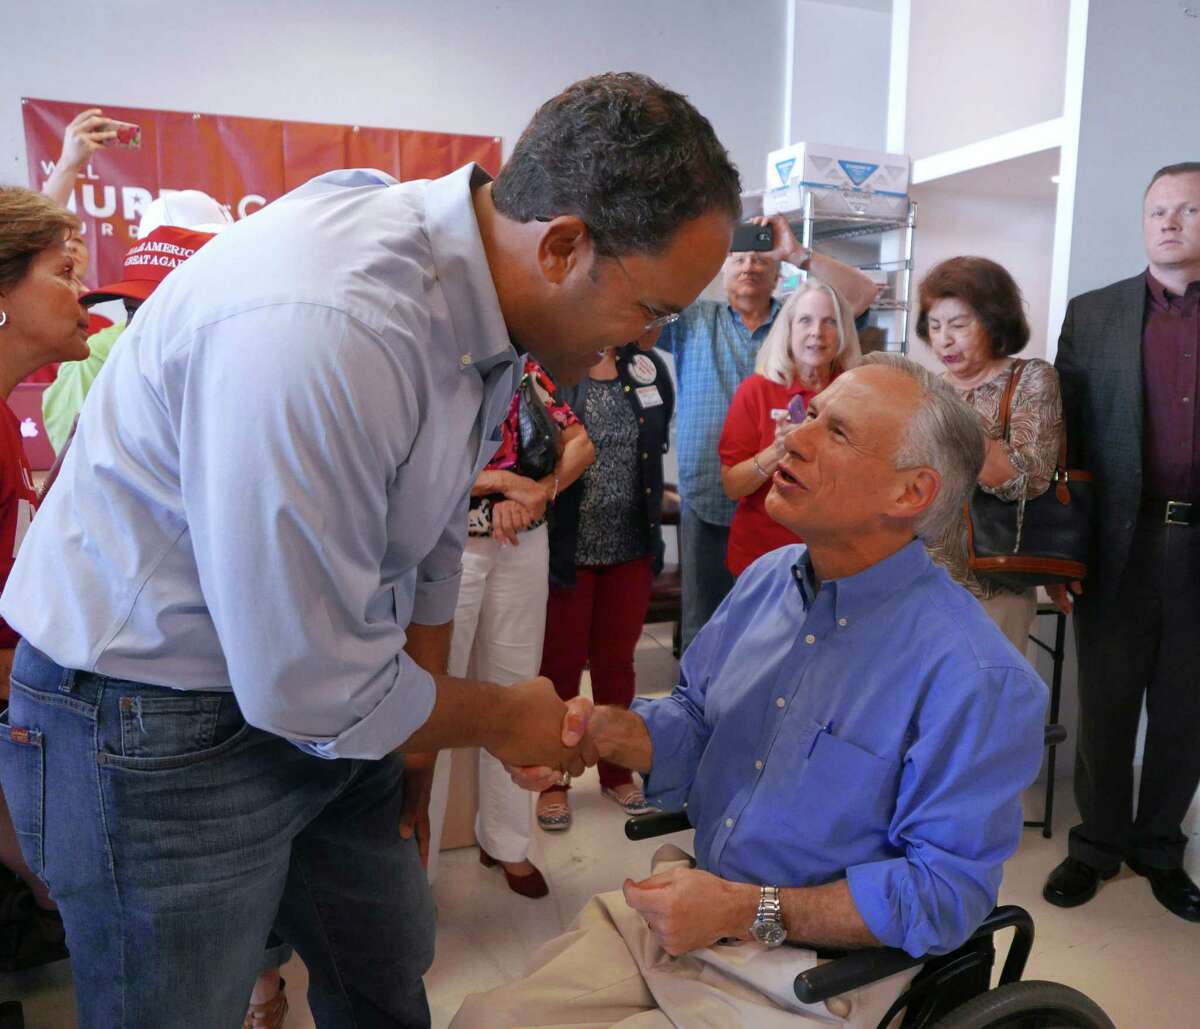 U.S. Rep. Will Hurd of San Antonio, left, greets GOP Texas Gov. Greg Abbott at Hurd's campaign headquarters near Loop 1604 at Huebner on Saturday. Abbott told supporters the race against challenger Pete Gallego has national importance.